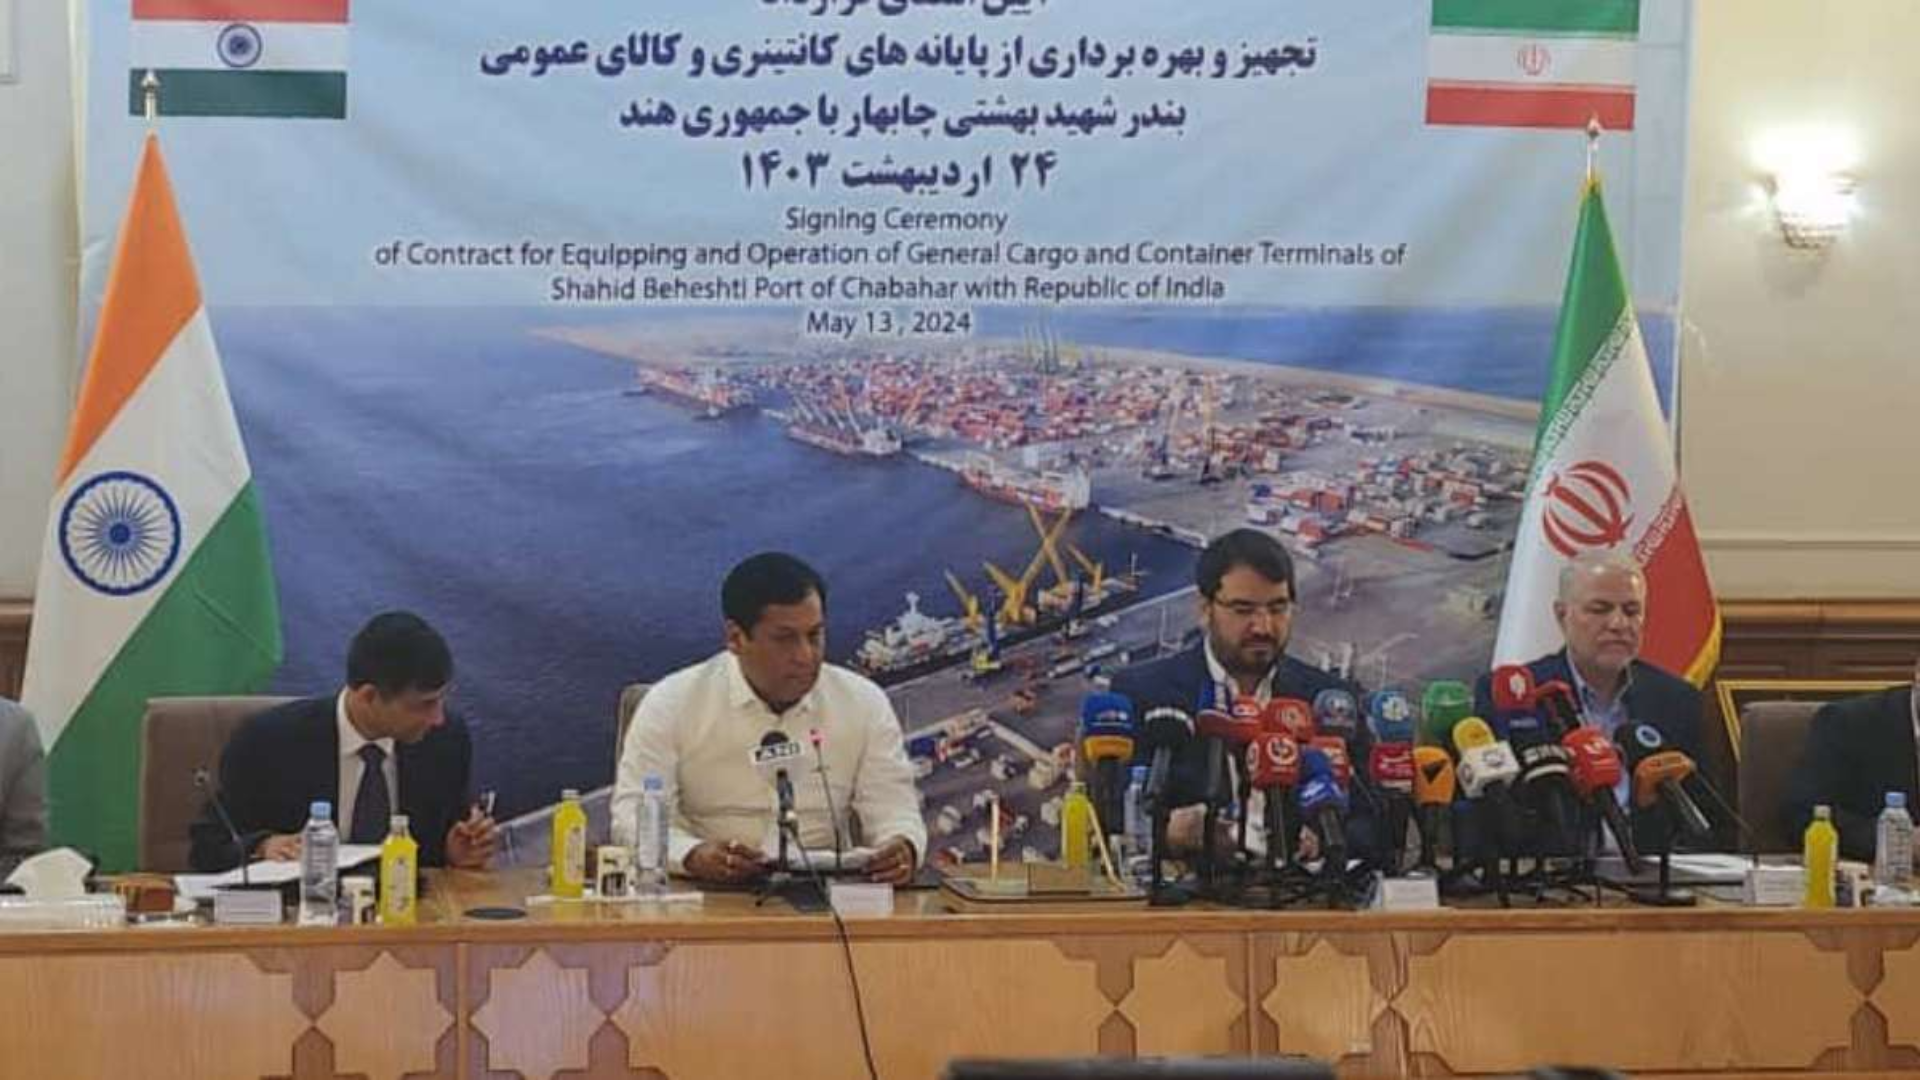 India Signs 10-Year Chabahar Port Agreement With Iran: Here's What You Need To Know